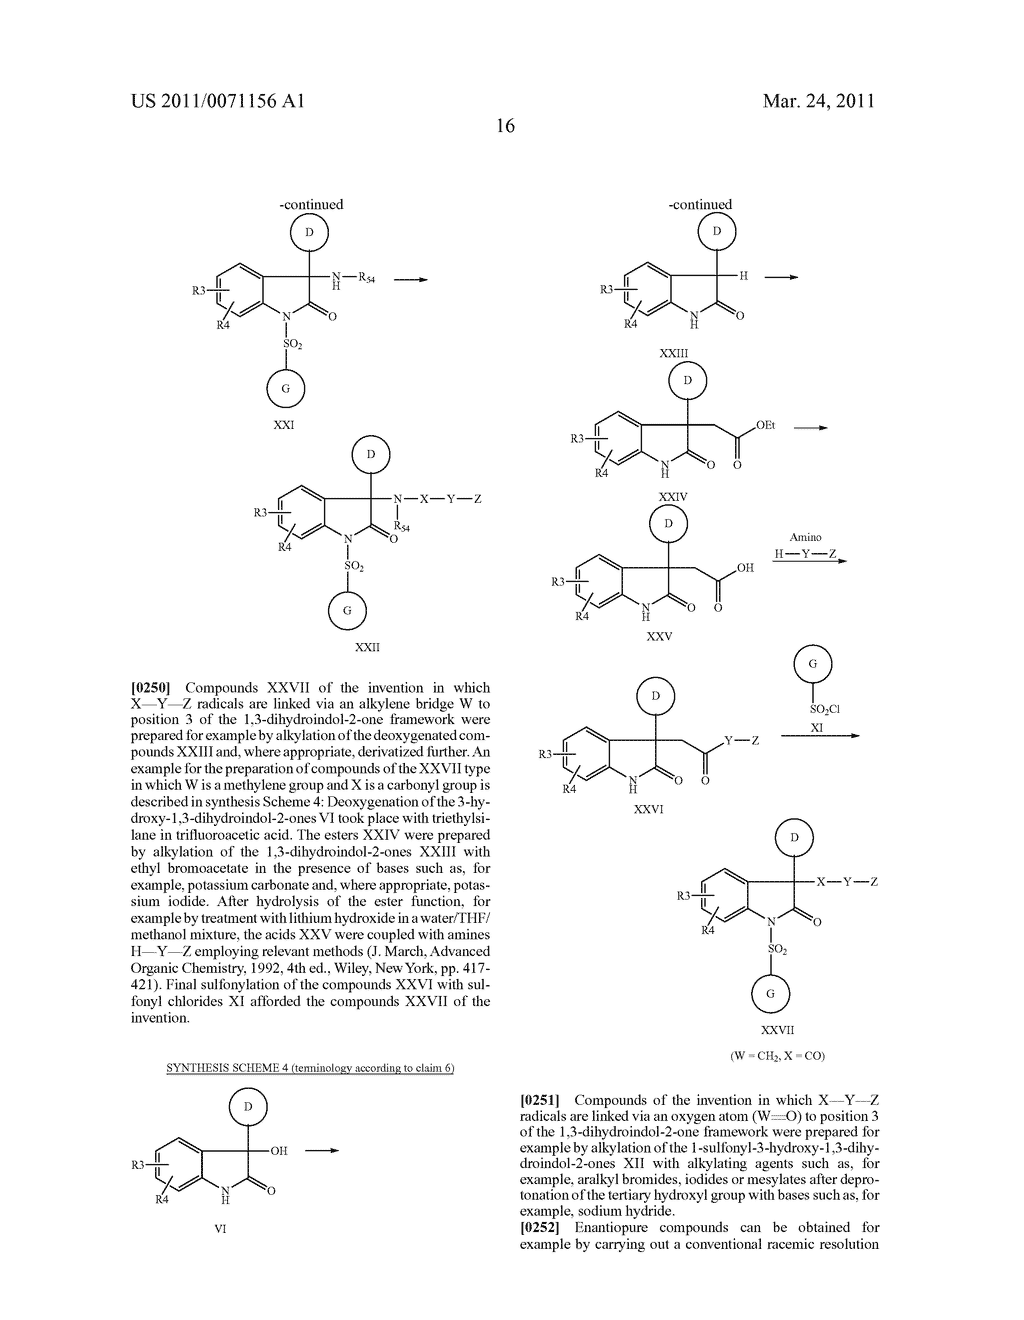 HETEROARYL-SUBSTITUTED 1,3-DIHYDROINDOL-2-ONE DERIVATIVES AND MEDICAMENTS CONTAINING THEM - diagram, schematic, and image 17